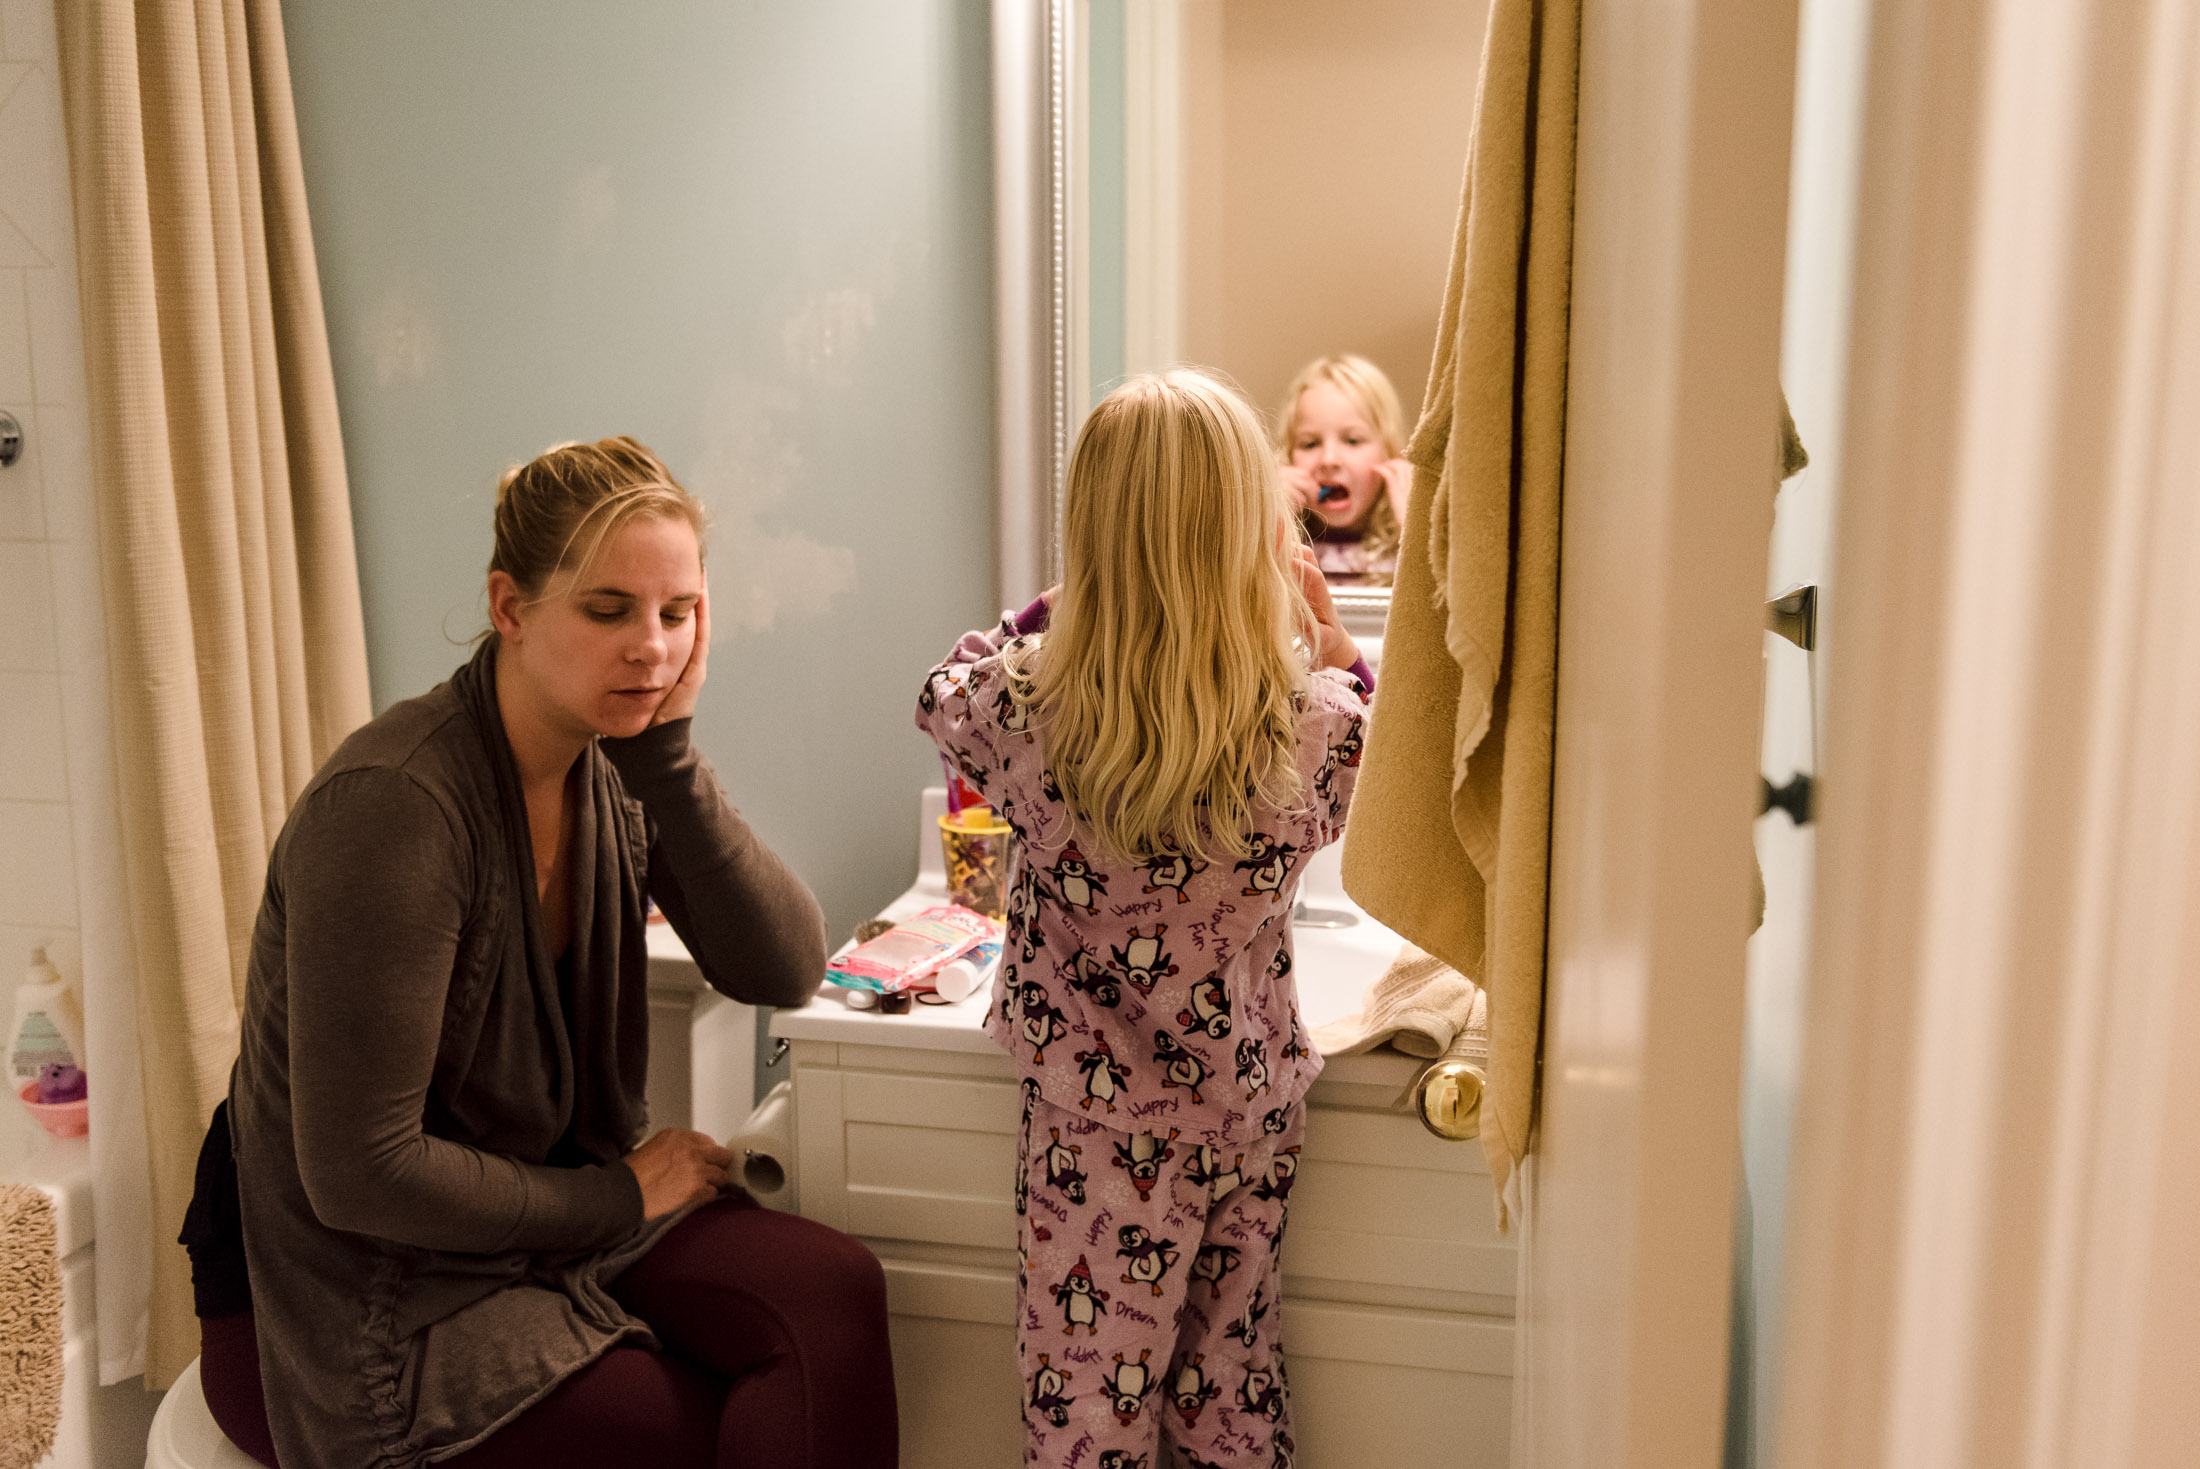 A mom waits for her daughter to brush her teeth as part of a day in the life photo session